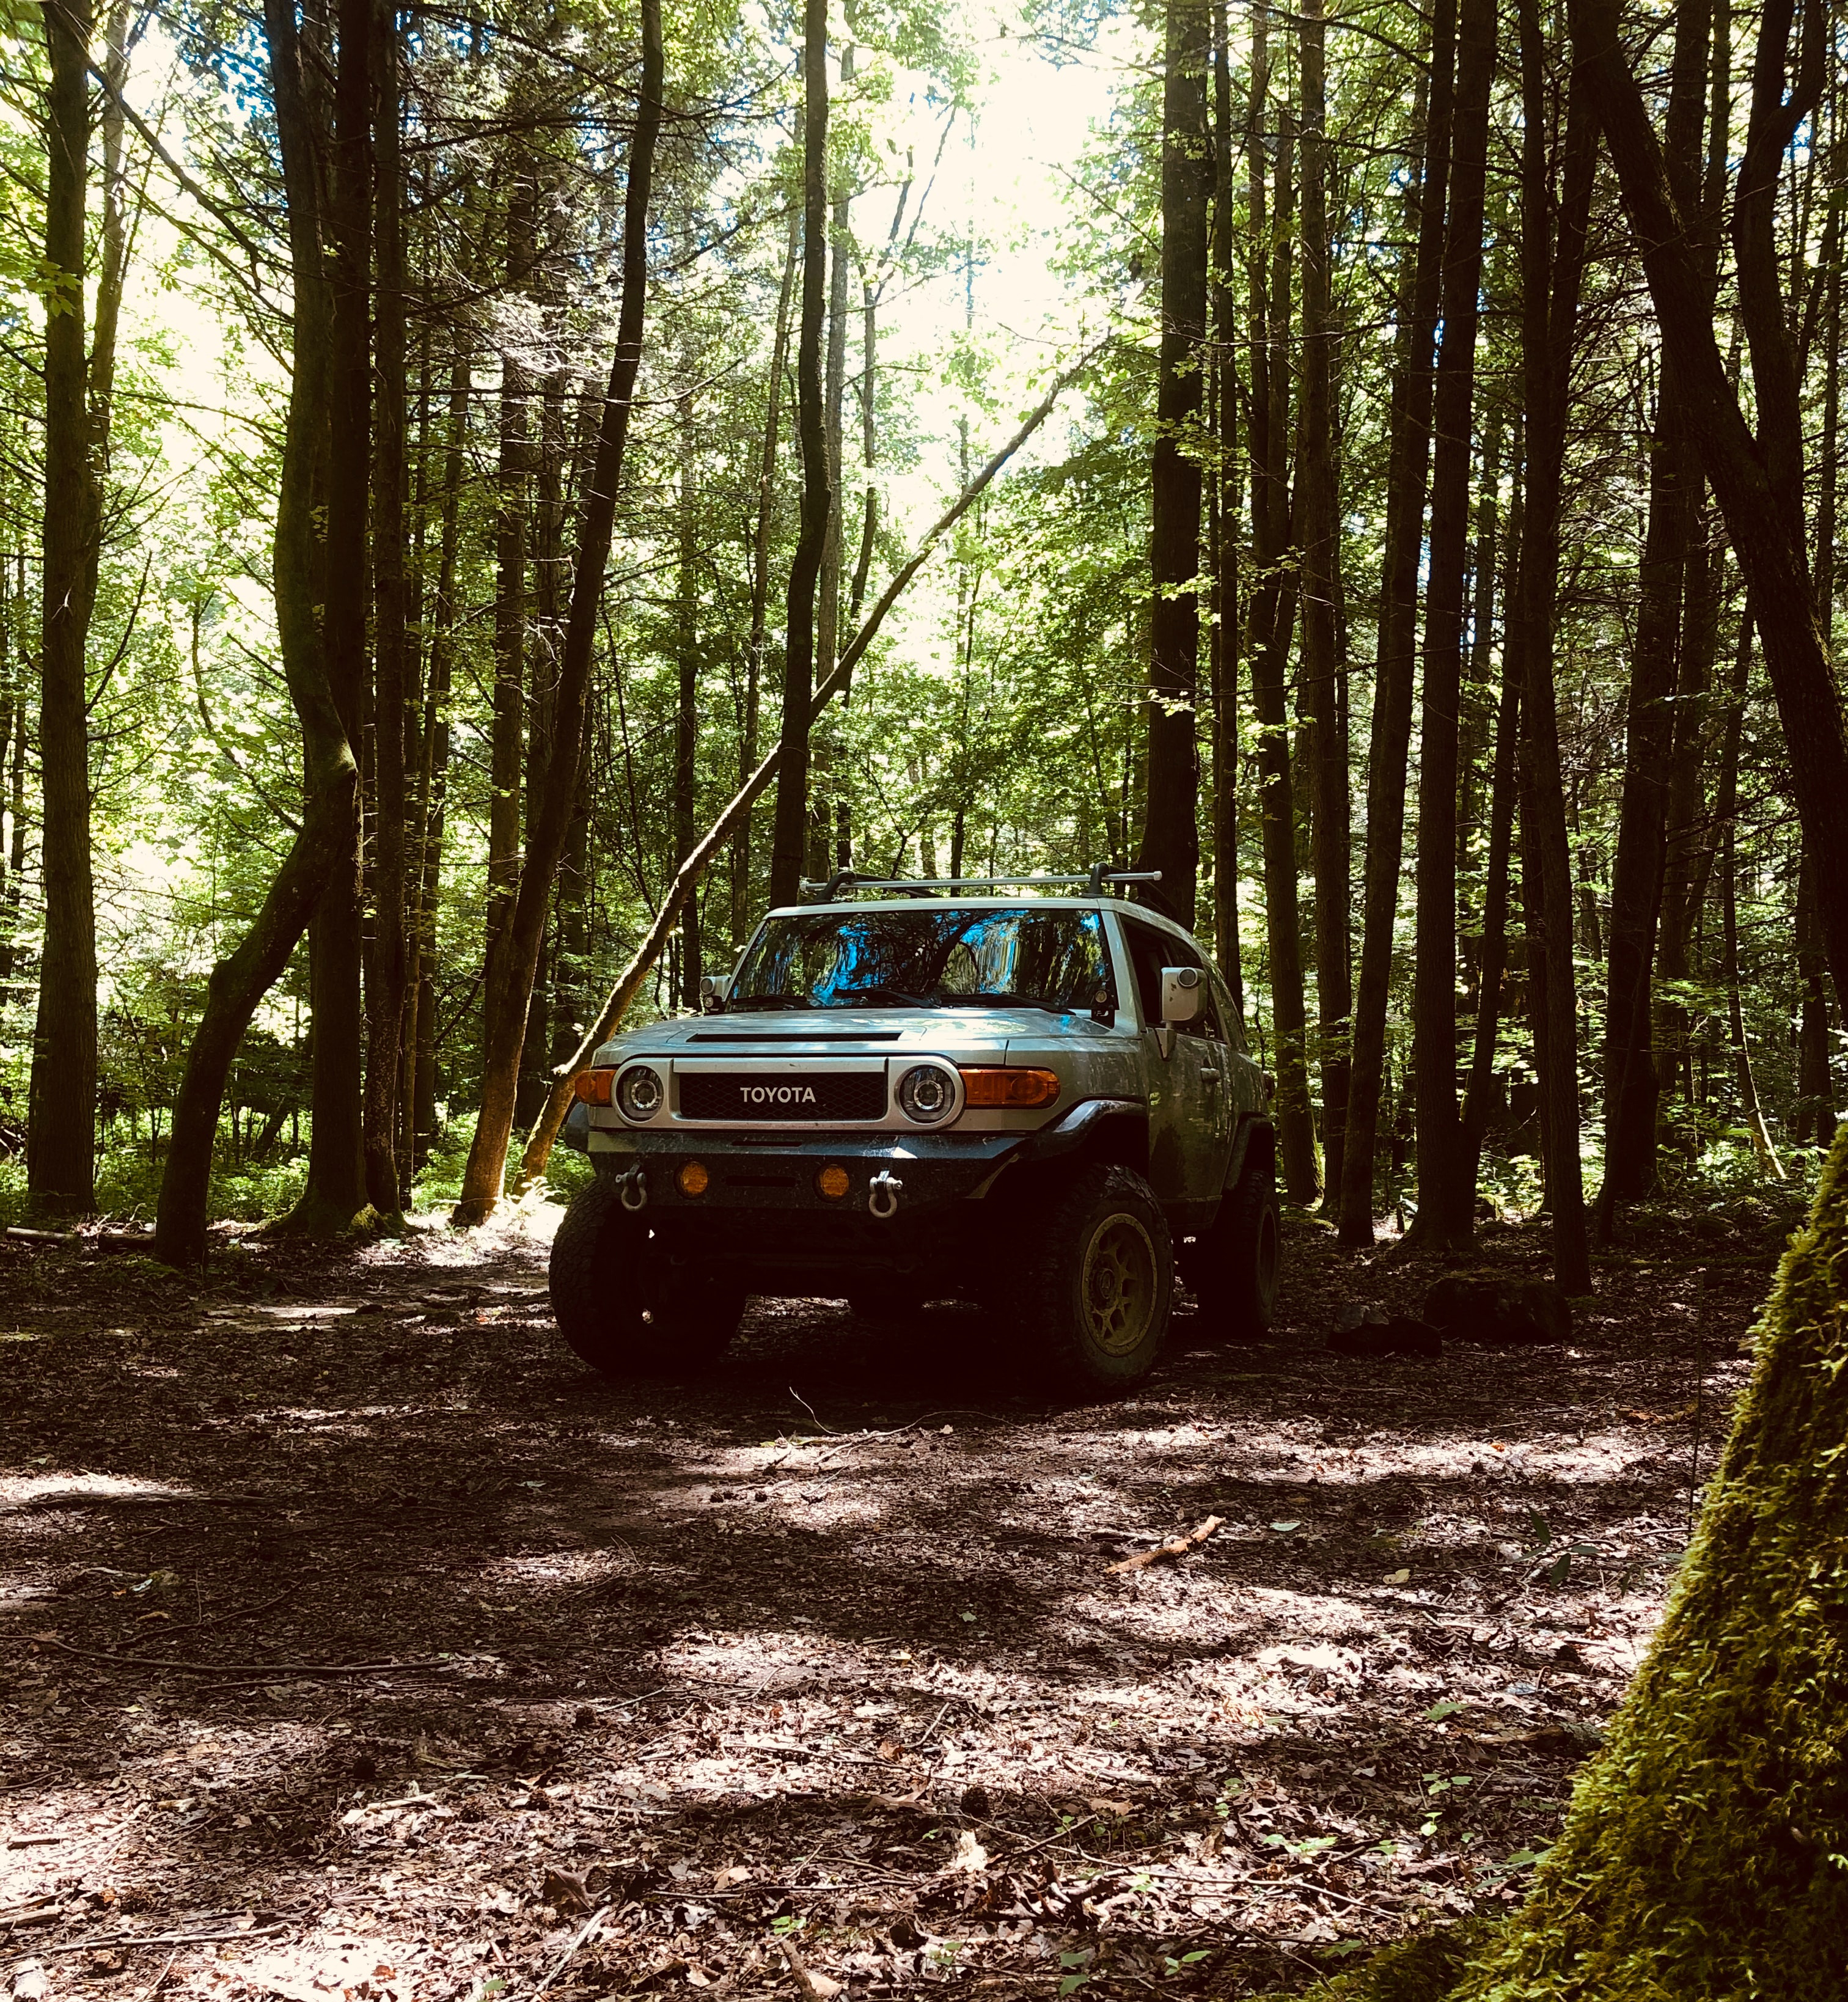 toyota, jeep, cars, forest, suv, front view HD wallpaper